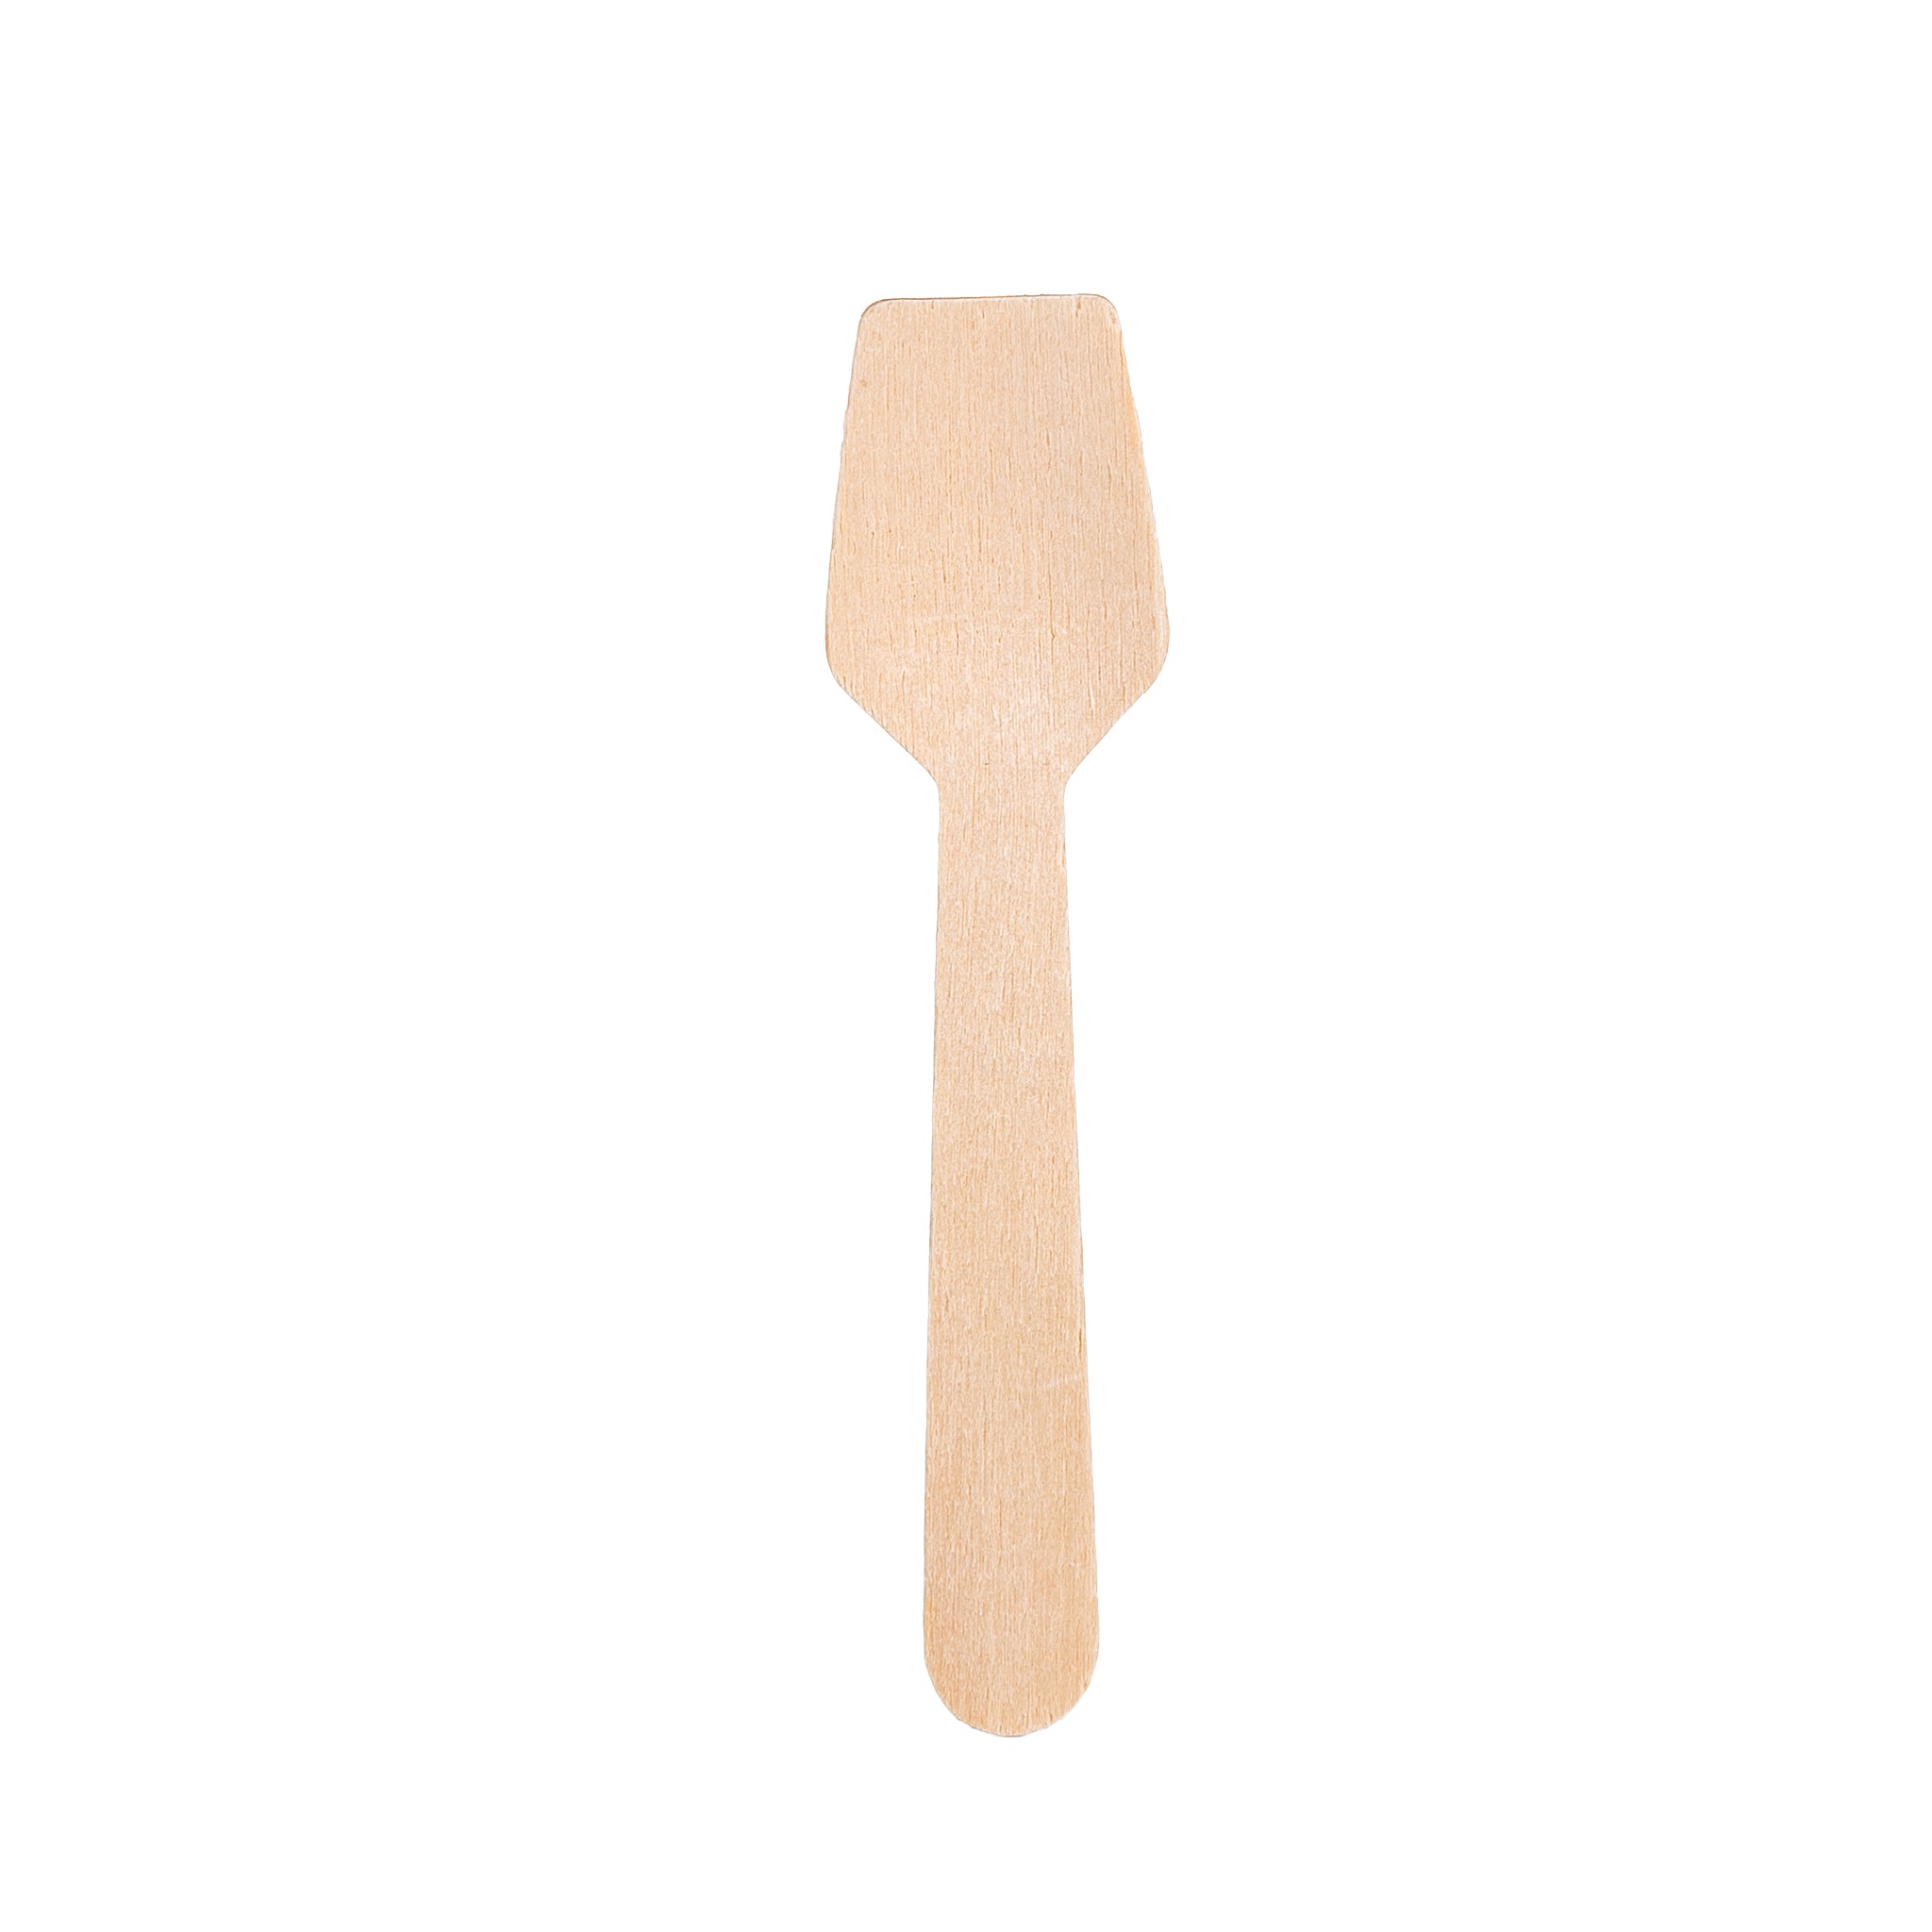 WoodU Disposable Wooden Square Spoon Taster with Concave 100 pcs Eco-friendly